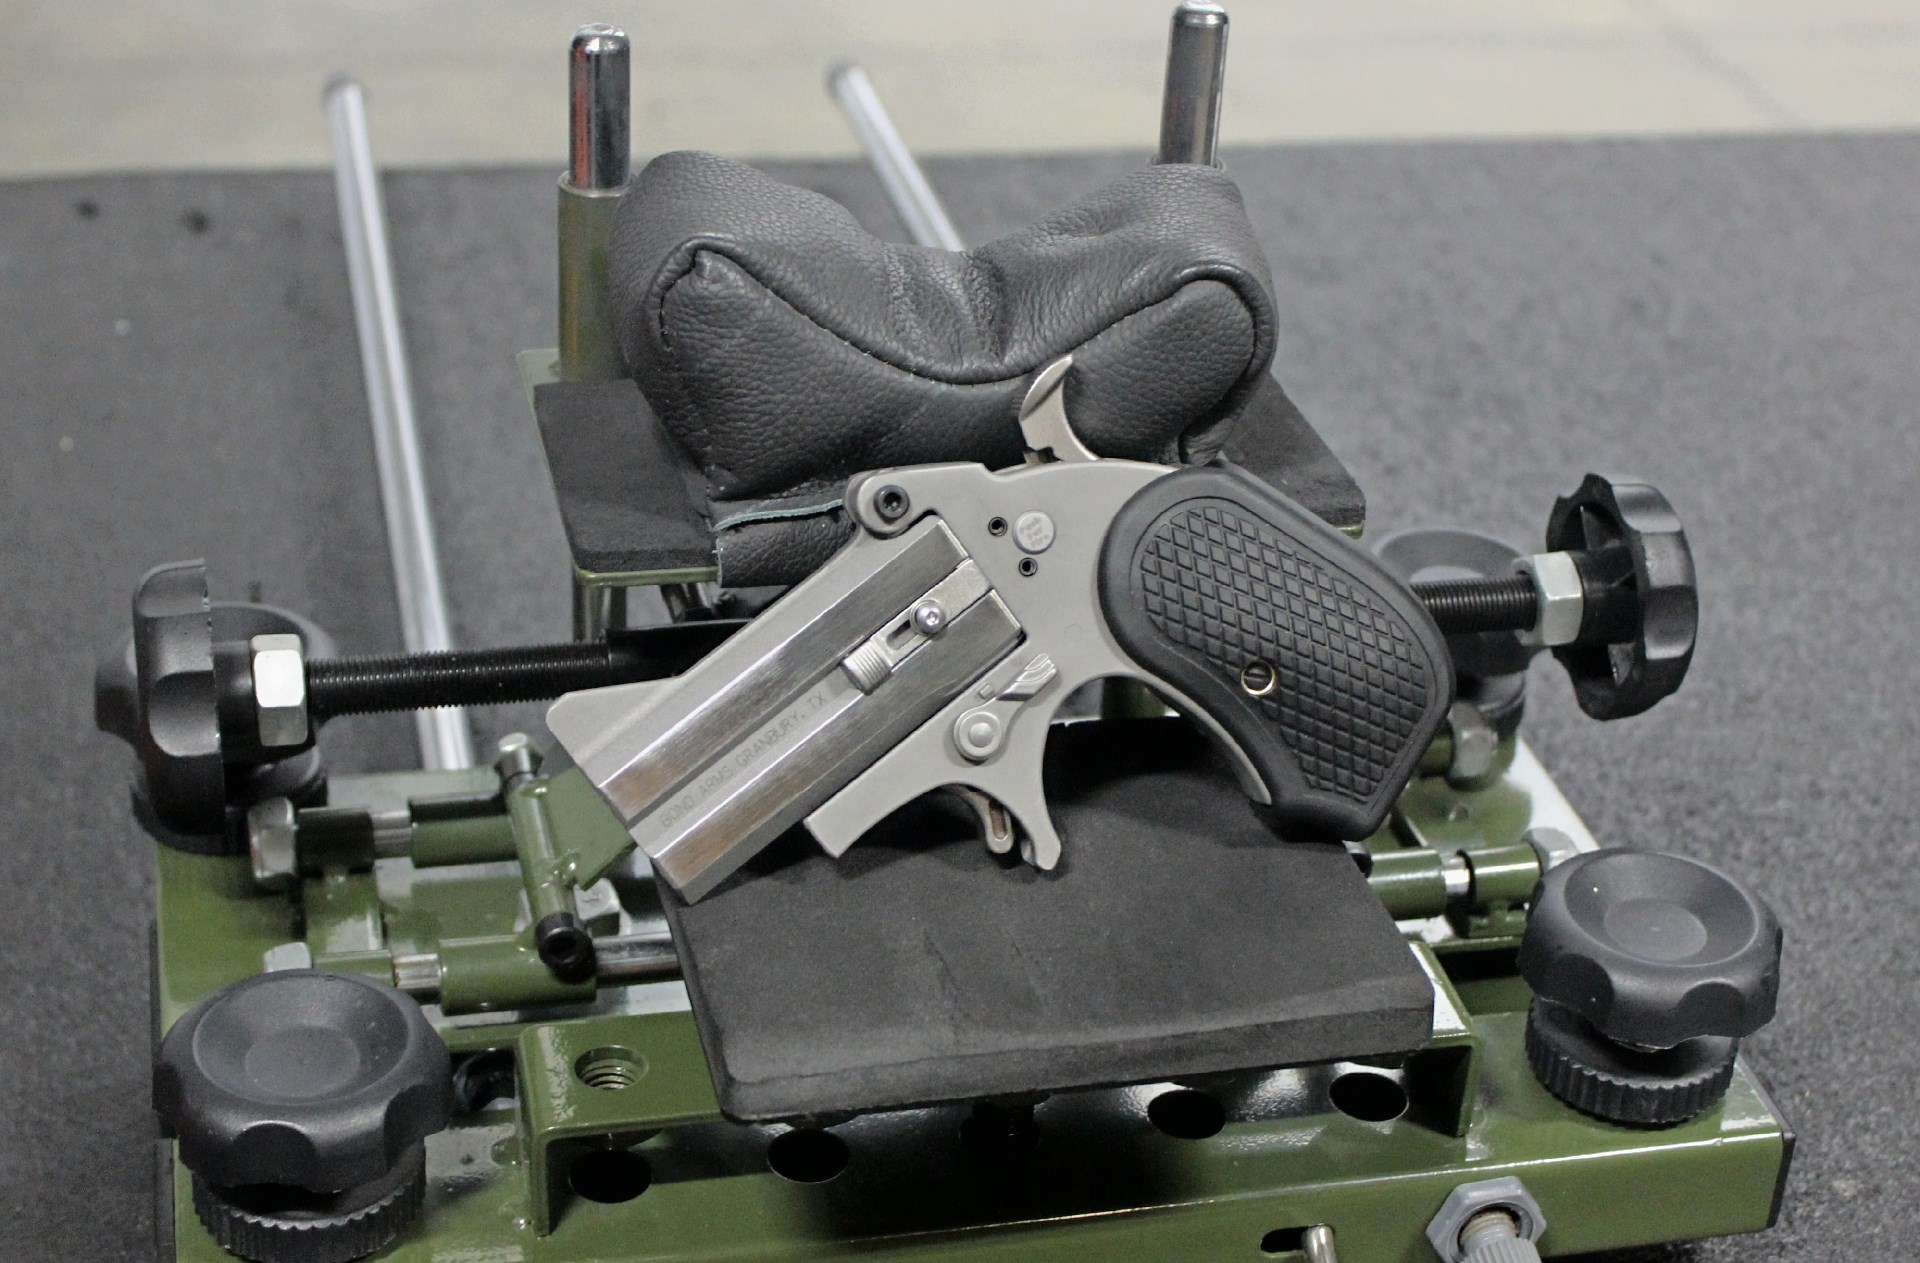 Left-side view of bond arms stinger rs conversion on shooting bench and support rest cradle